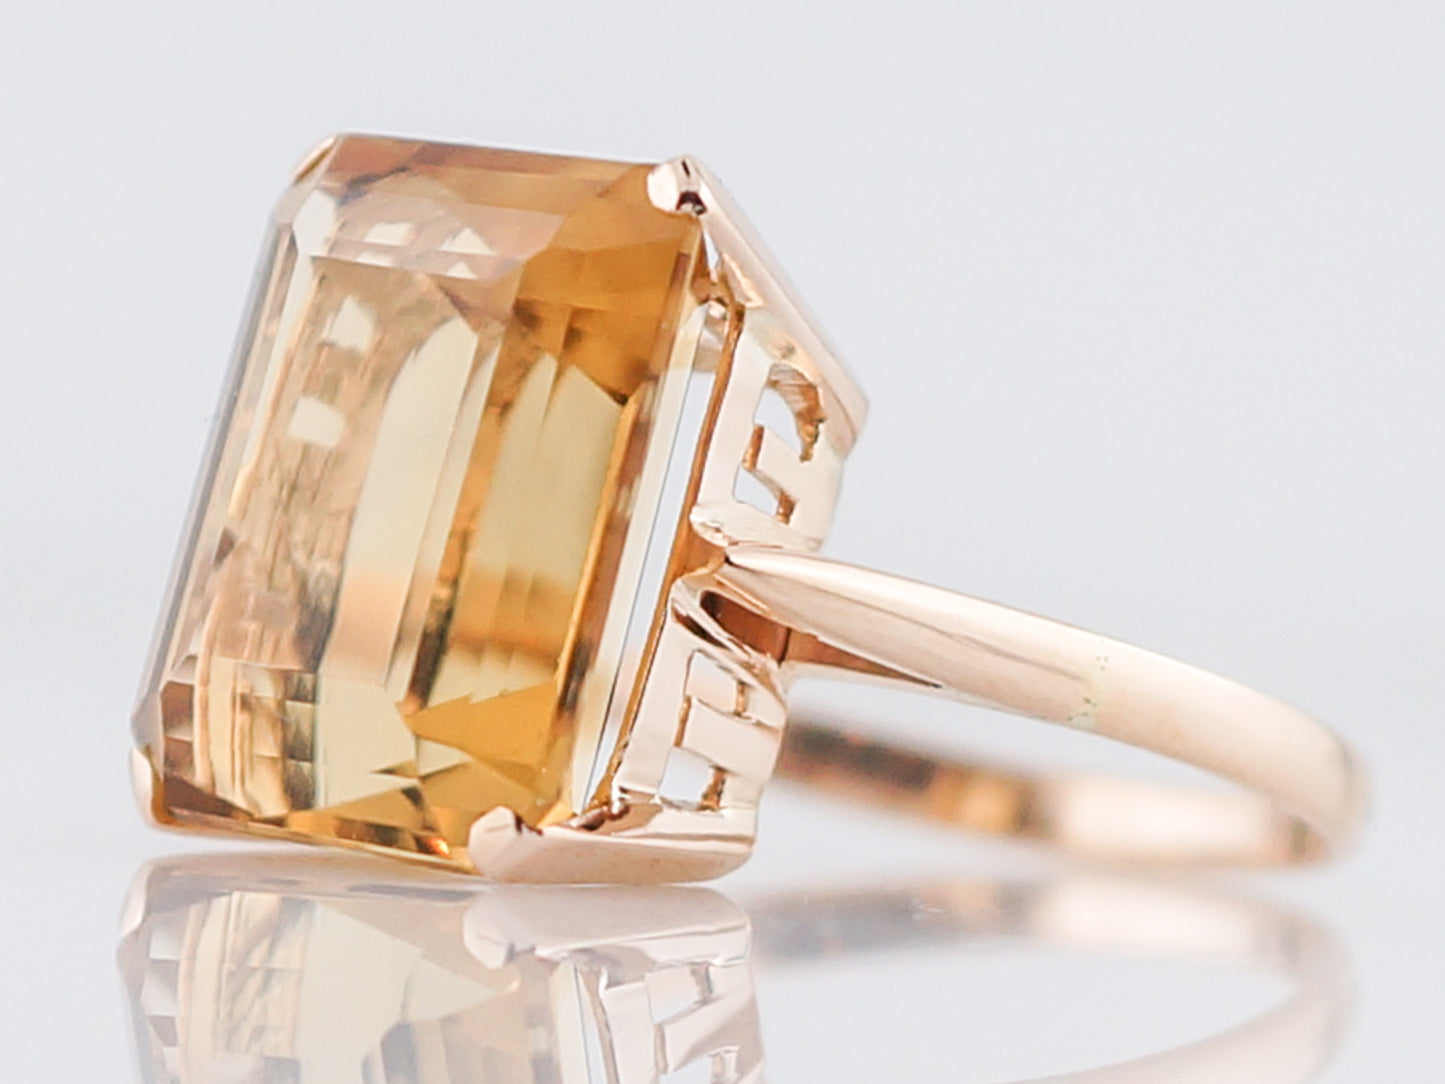 Vintage Cocktail Ring Mid-Century 7.06 Emerald Cut Citrine in 14k Yellow Gold